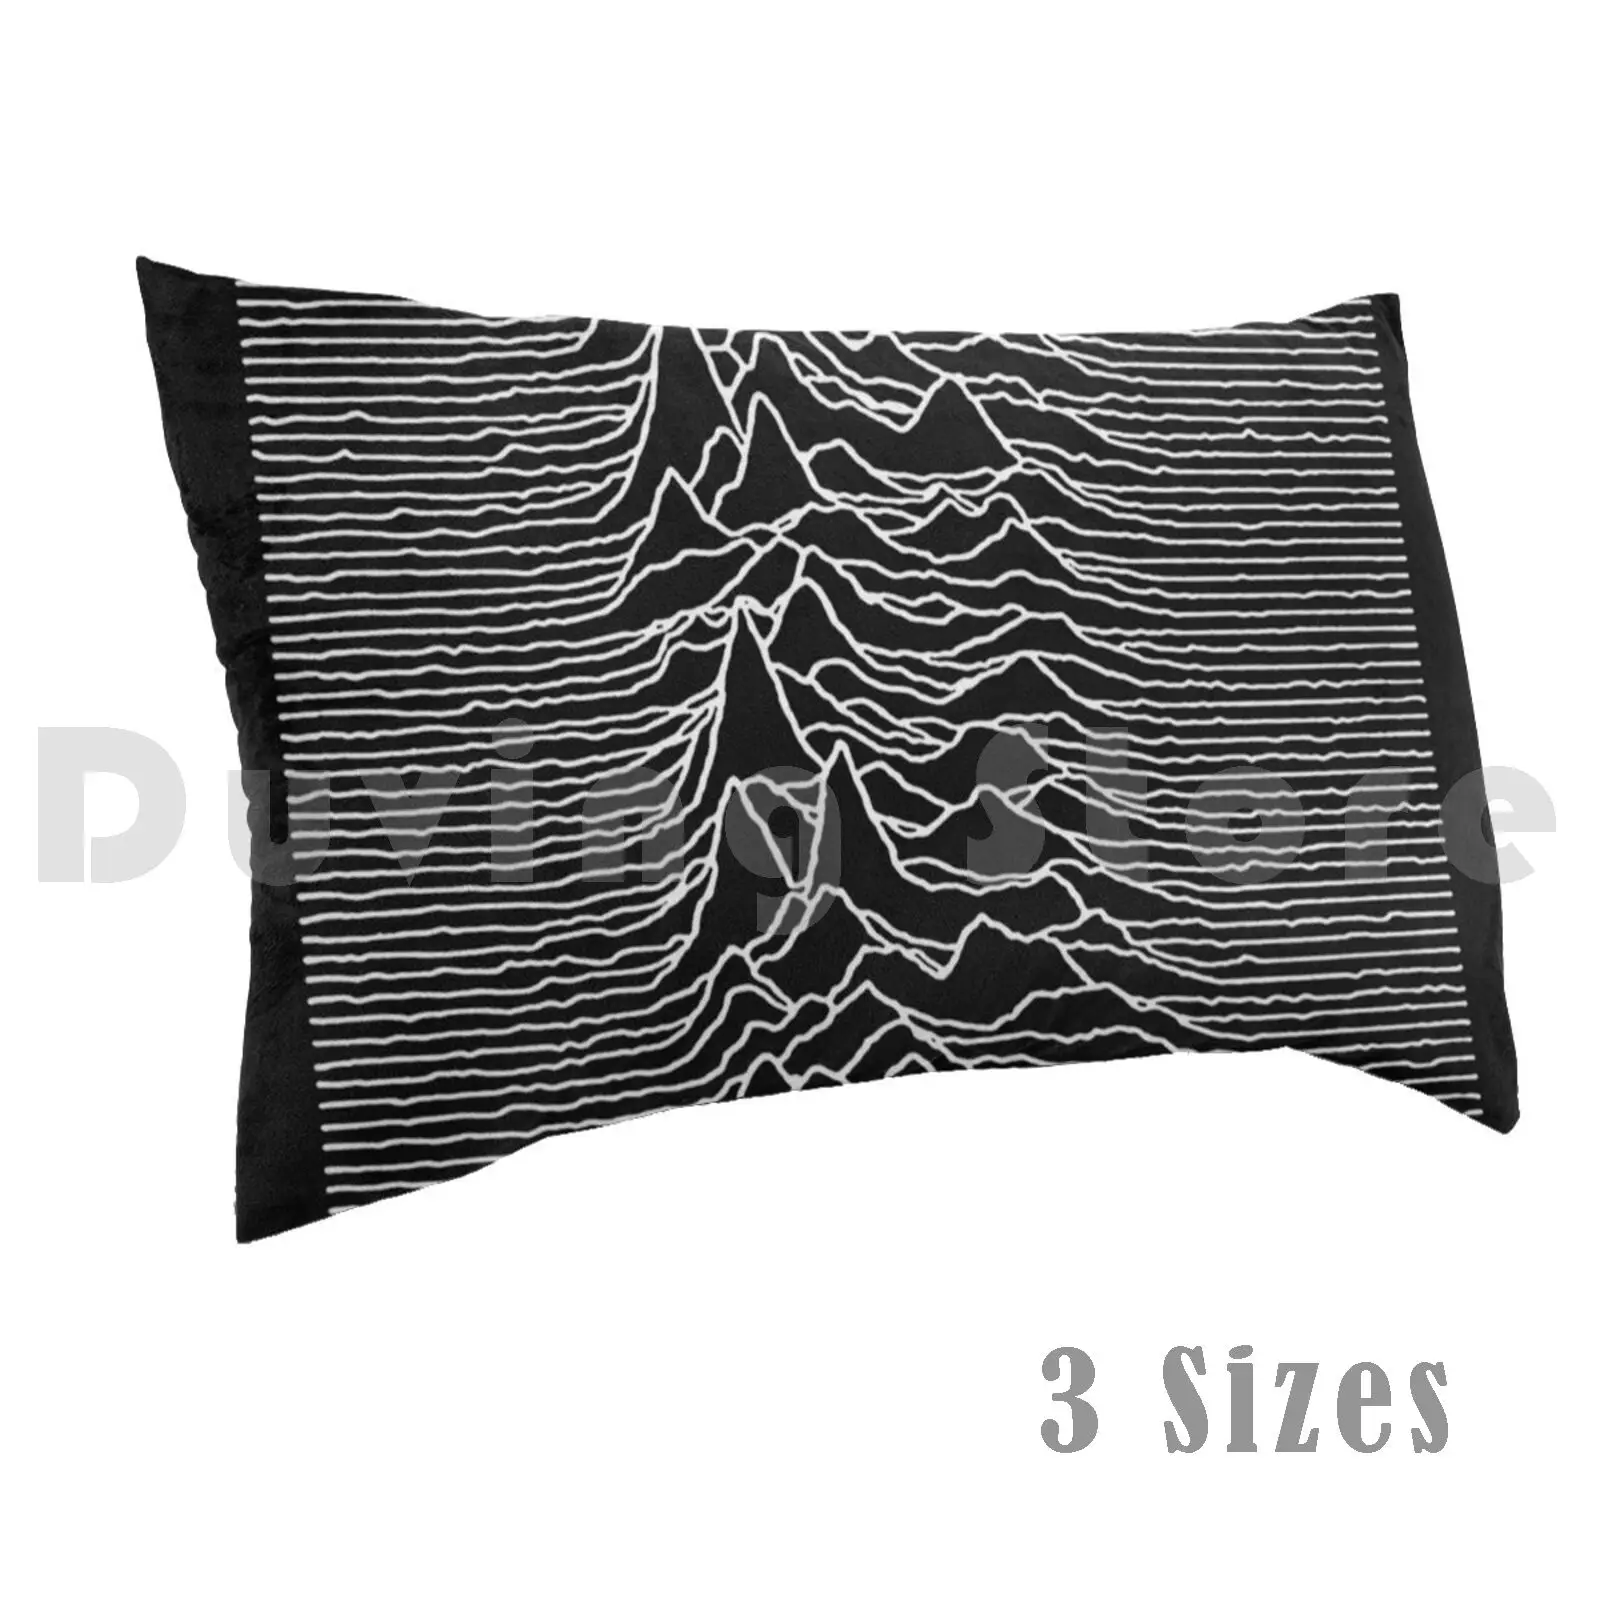 

Factory On Pillow Case DIY 50x75 Joy Division New Order Music Ian Curtis Punk Band Post Punk Factory Records